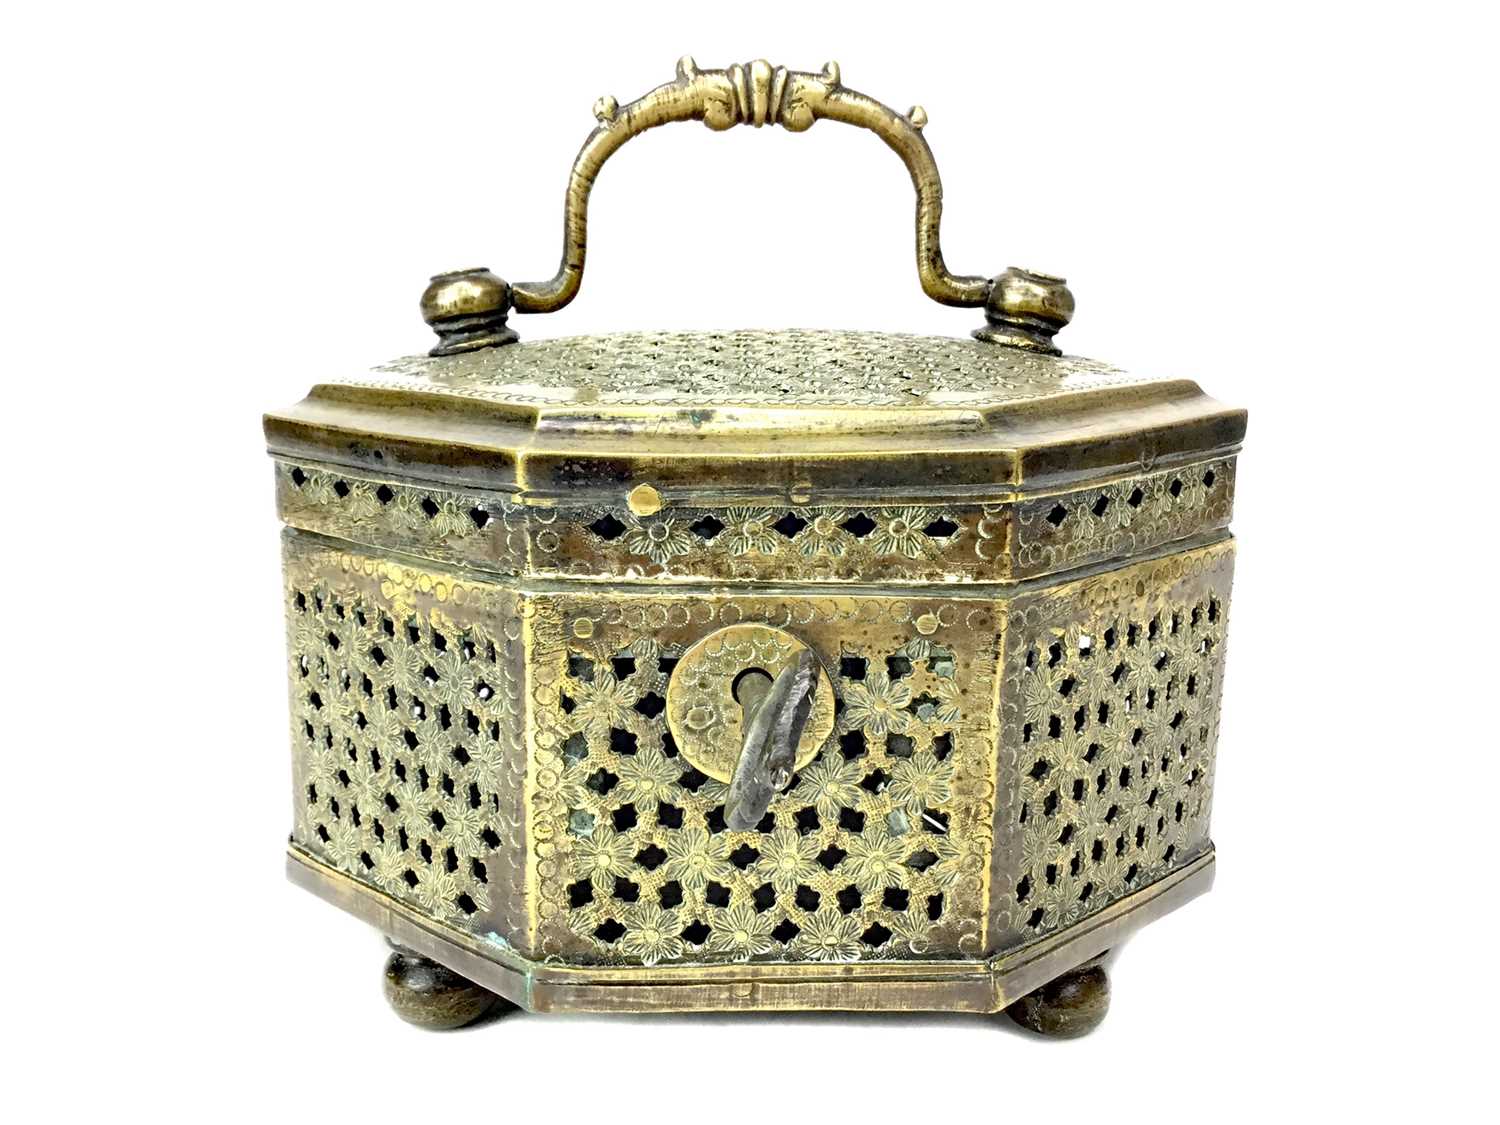 Lot 857 - AN EARLY 20TH CENTURY CHINESE BRASS CASKET